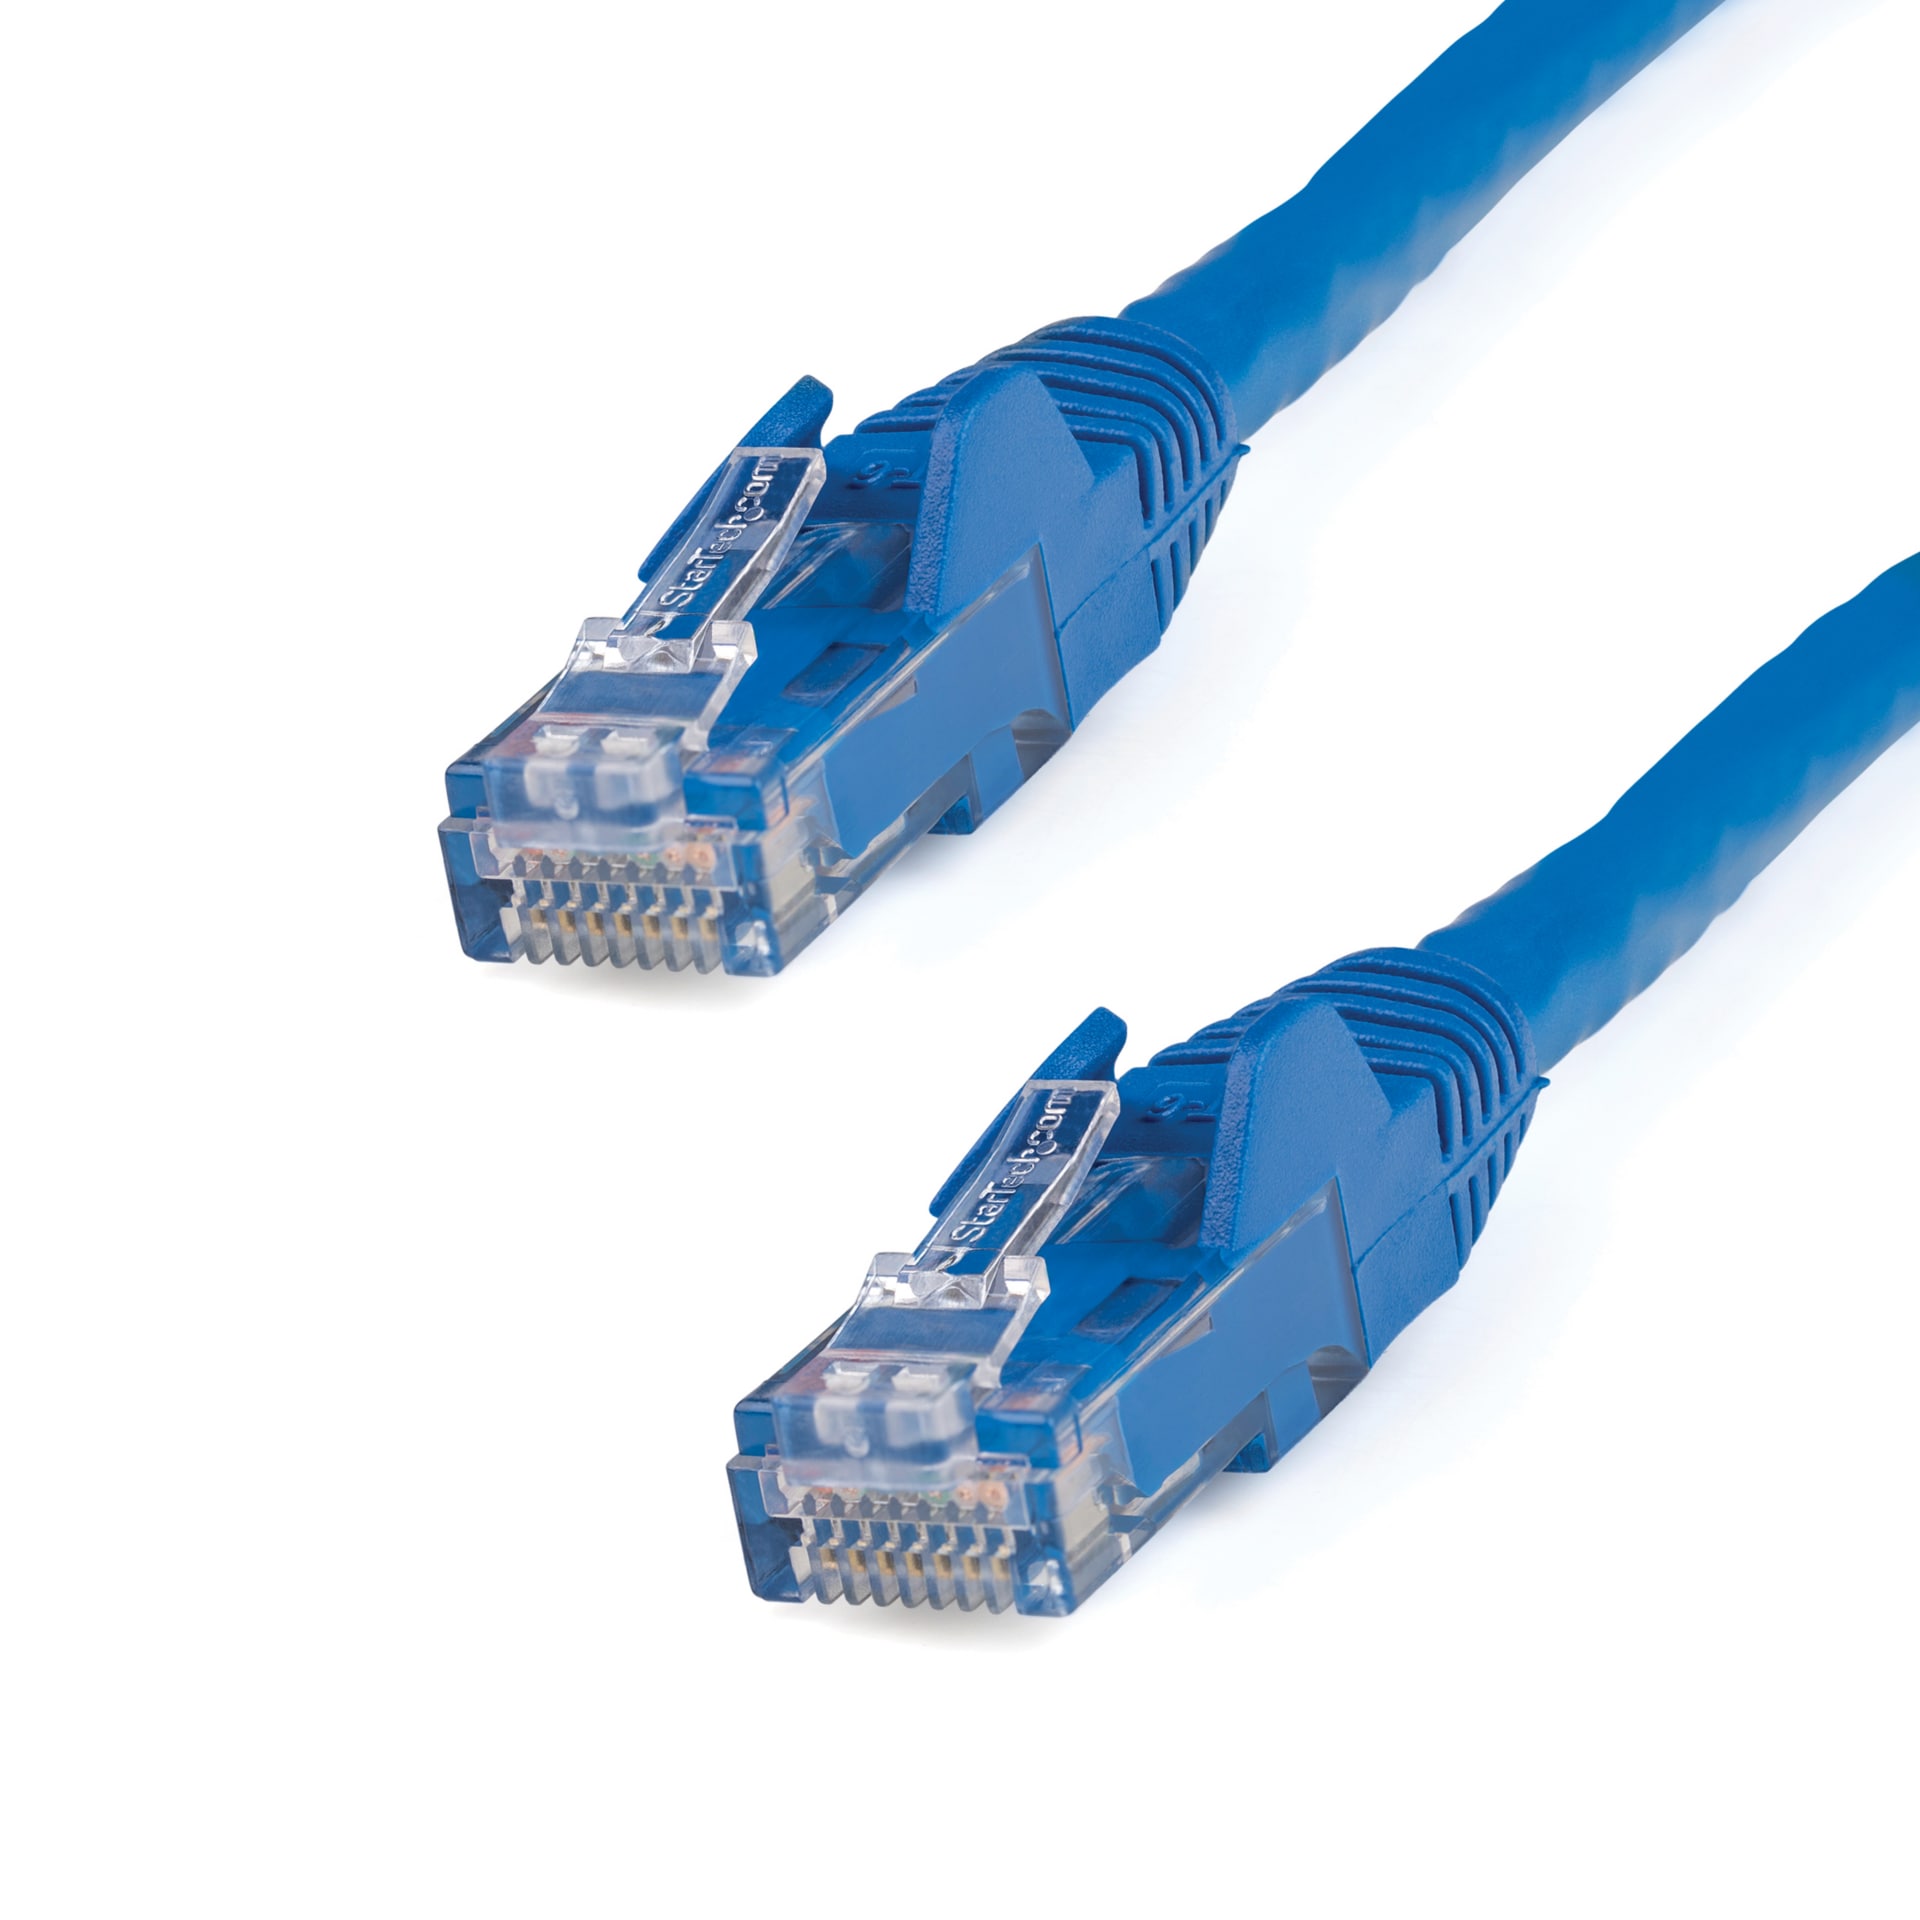 Cat6 Ethernet Cables, Cat6 Network Cable, Cat 6 LAN Wiring & Patch Cable